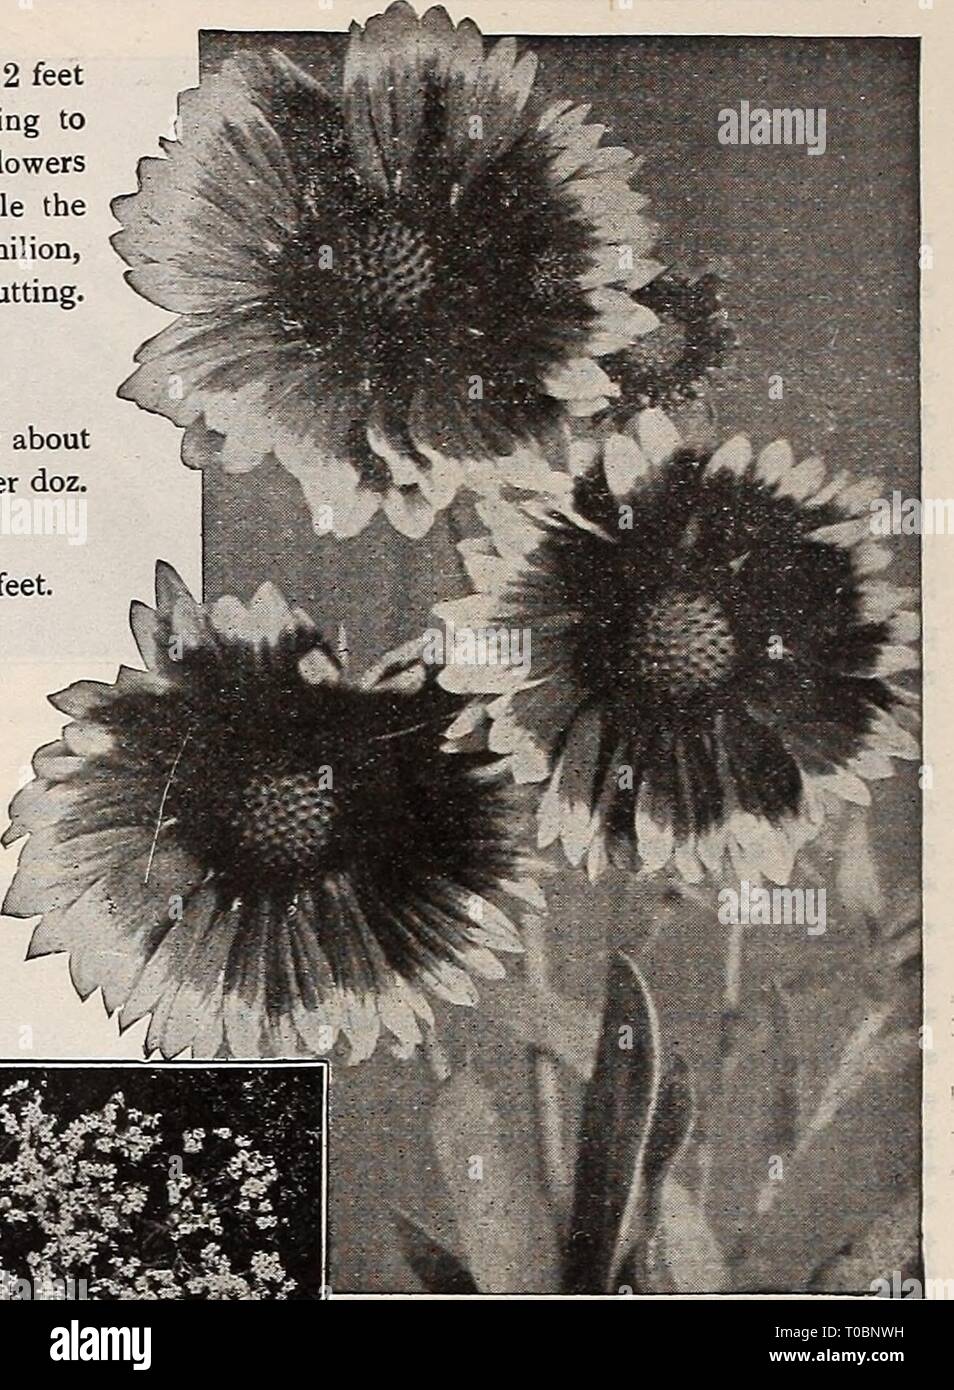 Dreer's garden book 1919 (1919) Dreer's garden book 1919 dreersgardenbook1919henr Year: 1919  Geum Gaillardia Grandiflora Gilleuia (Bowman's Root) Trifoliata. A strong-growing perennial; admirable for the border or for use in connection with shrubs, with handsome trifoliate foliage and numerous white flowers, tinged with pink; July; 3 feet 25 cts. each; $2.50 per doz. GI.ECIIOI»IA^ OR NEPETA Variegata (Variegated Groundsel, or Ground Ivy.) A most useful variegated creeper for growing over banks and stones in the rockery. 20 cts. each; $2.00 per doz.; $12.00 per 100. GYPSOPIIIL,A (Baby's Breath Stock Photo